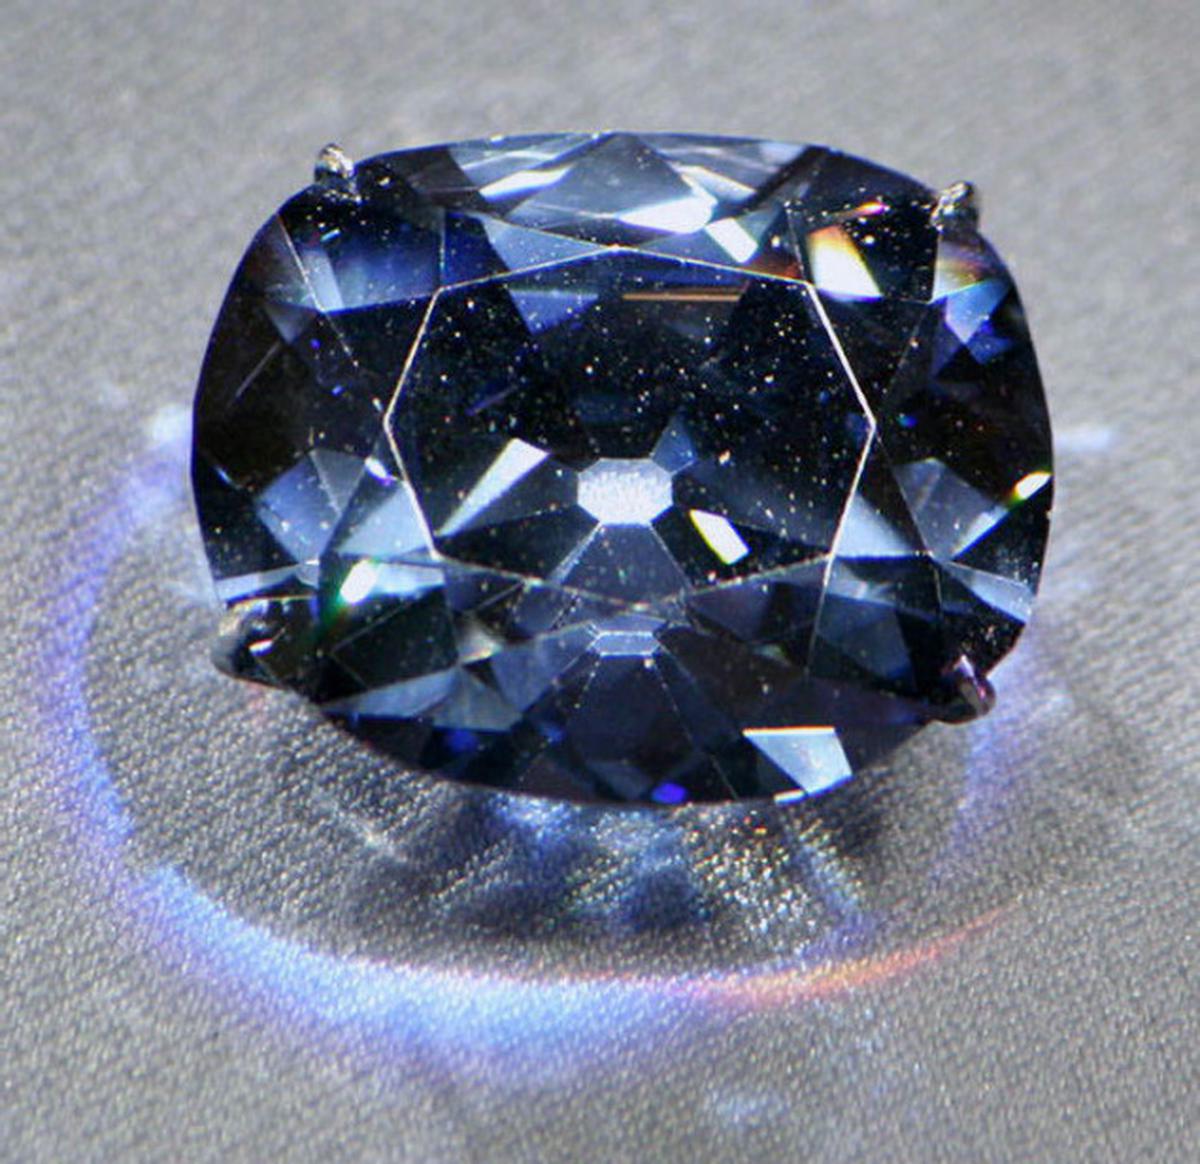 Stolen in 1792, the French Blue diamond's fate puzzled historians